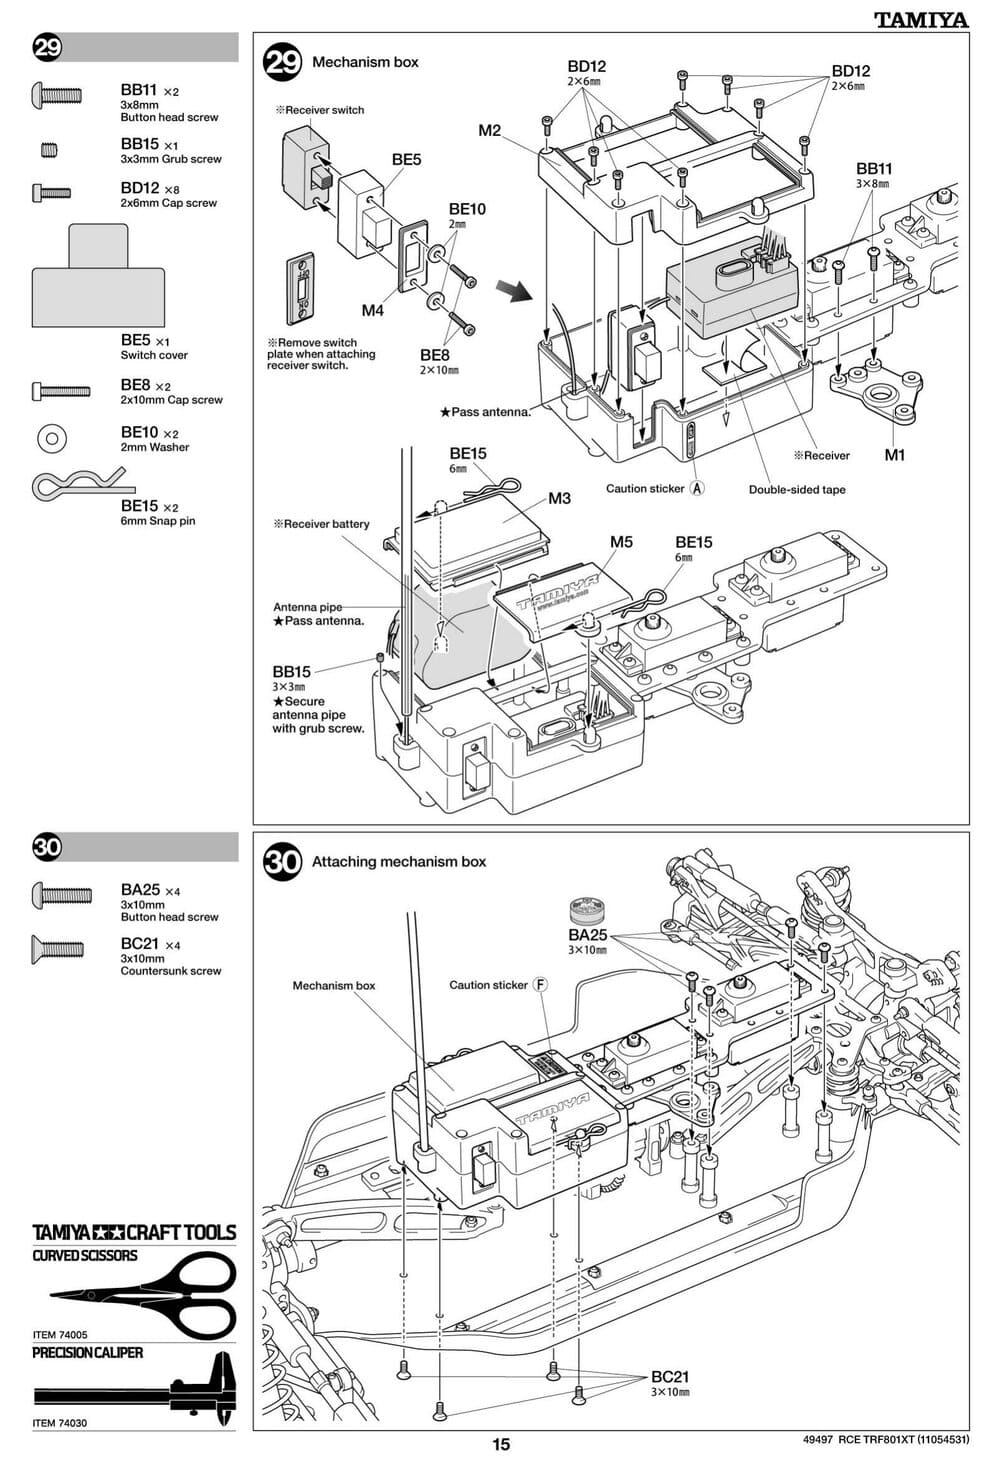 Tamiya - TRF801Xt Performance Package Version Chassis - Manual - Page 15